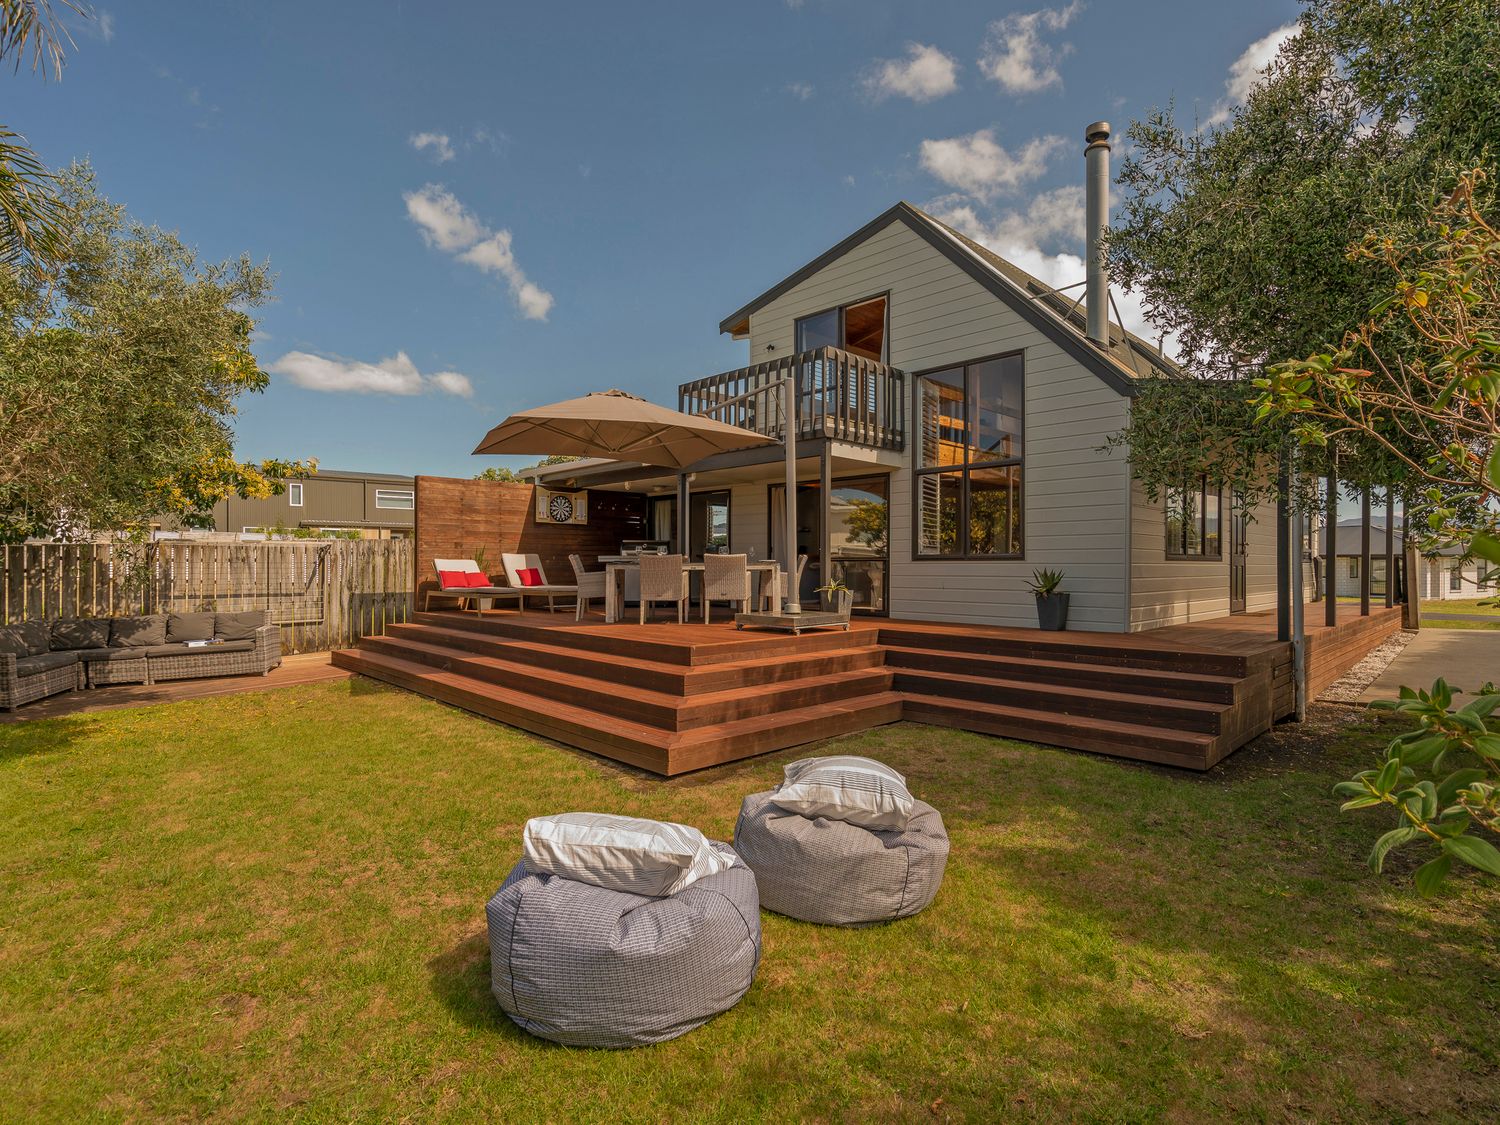 Beaut Bach on Beverley - Whangamata Holiday Home -  - 1064046 - photo 1